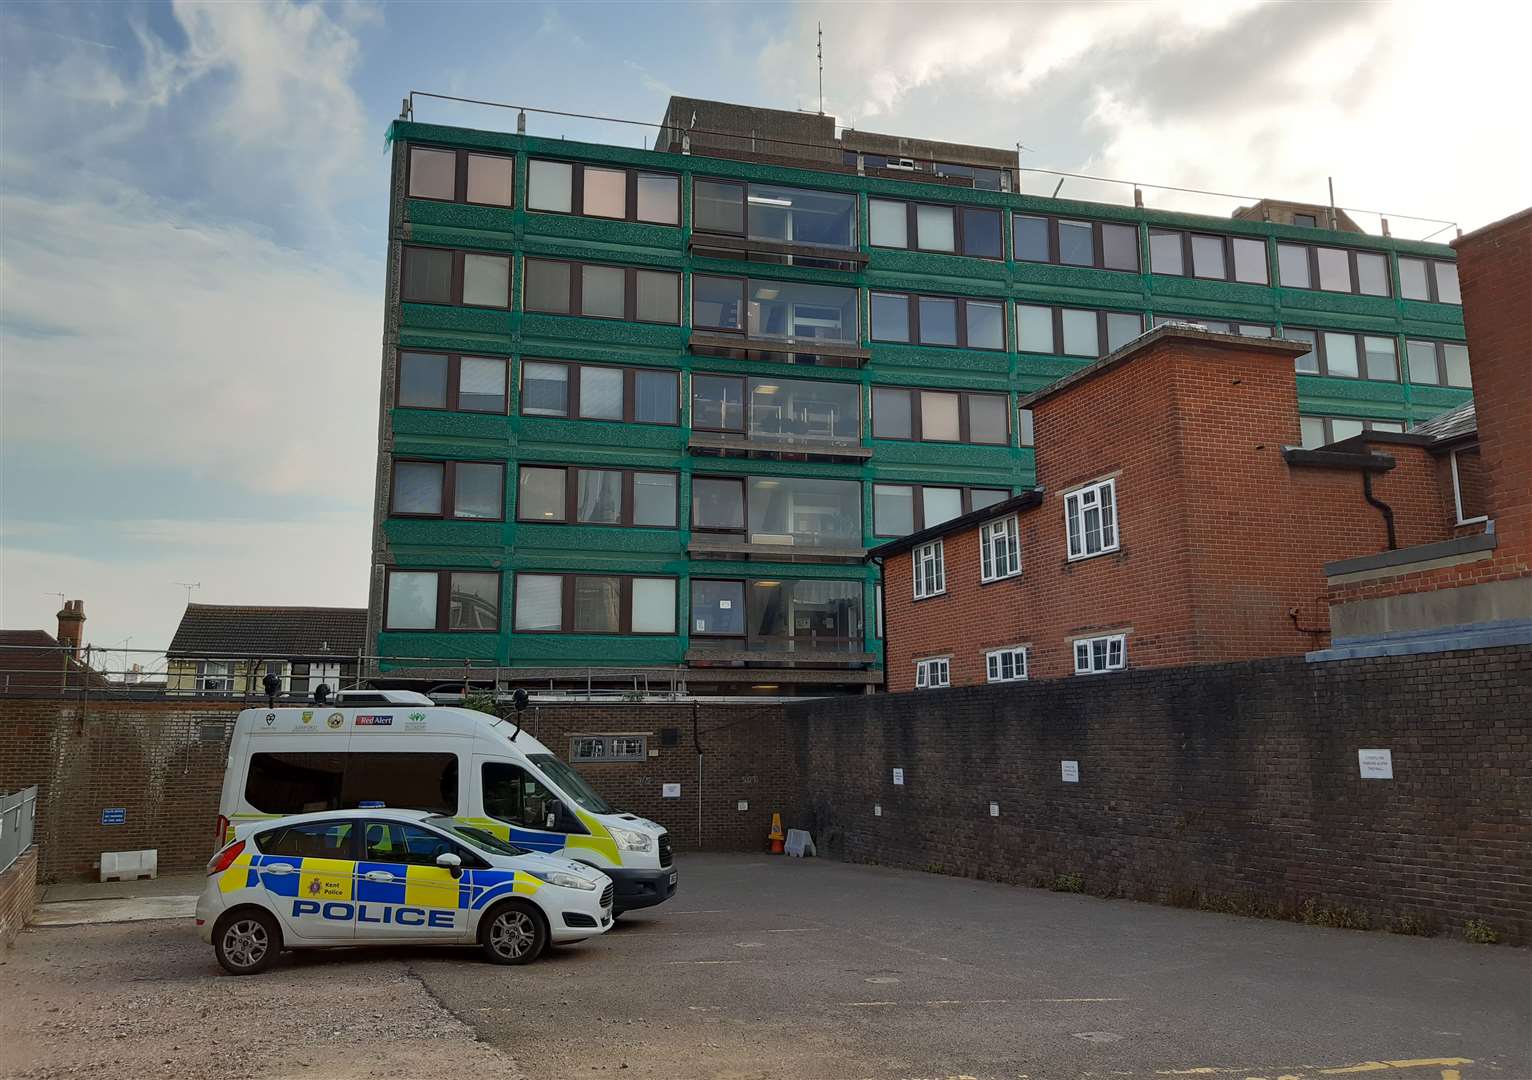 Ashford police station is being upgraded